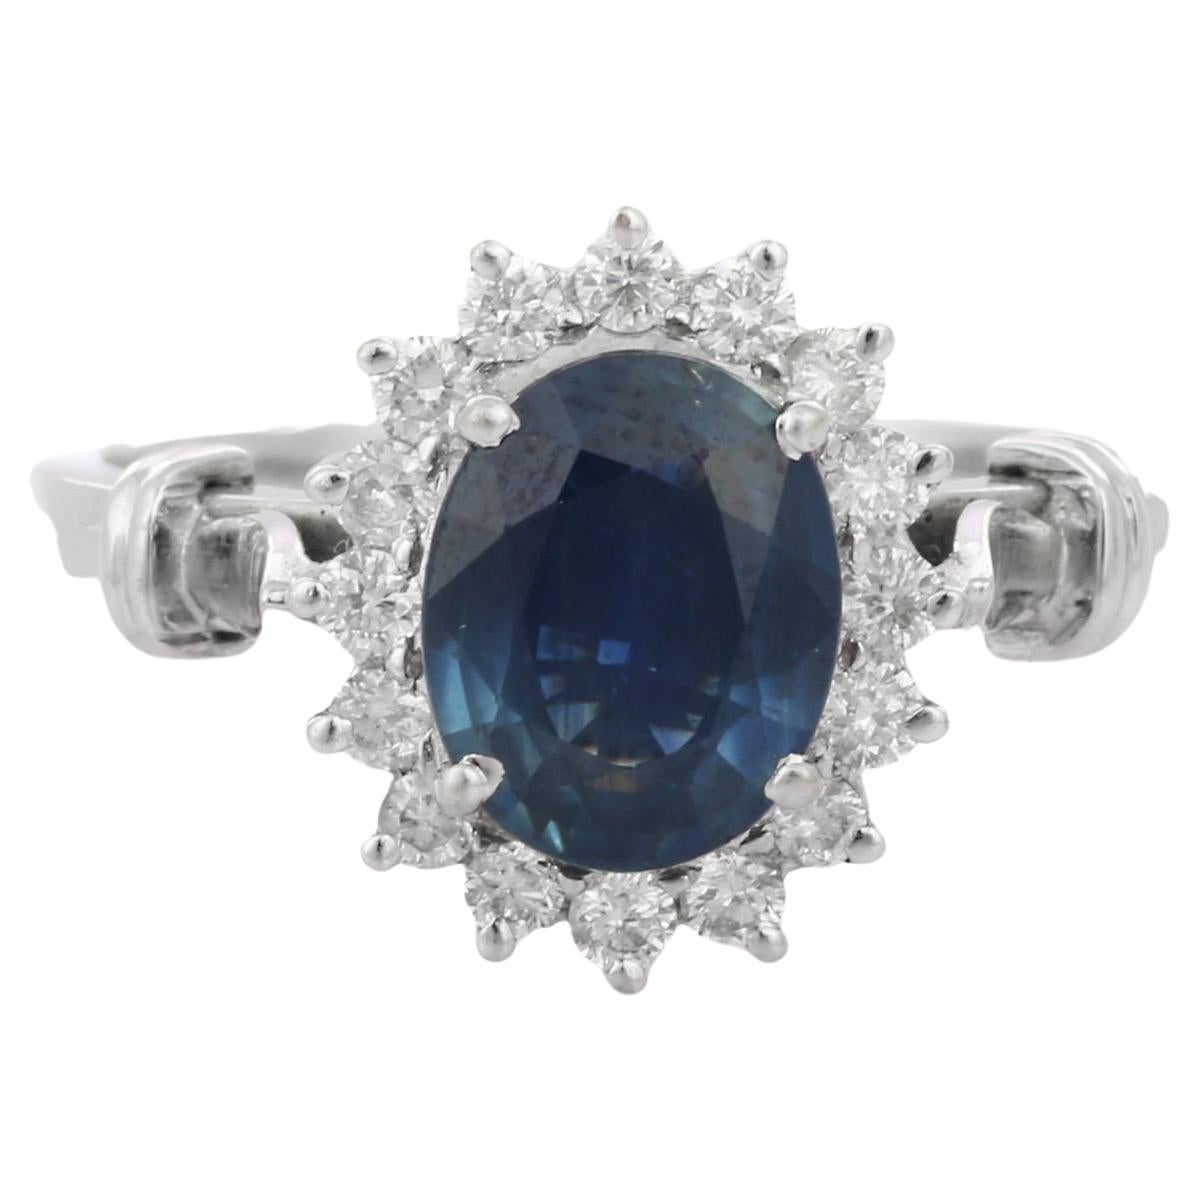 For Sale:  Royal Deep Blue Sapphire Betwixt Diamond Engagement Ring in 18K White Gold